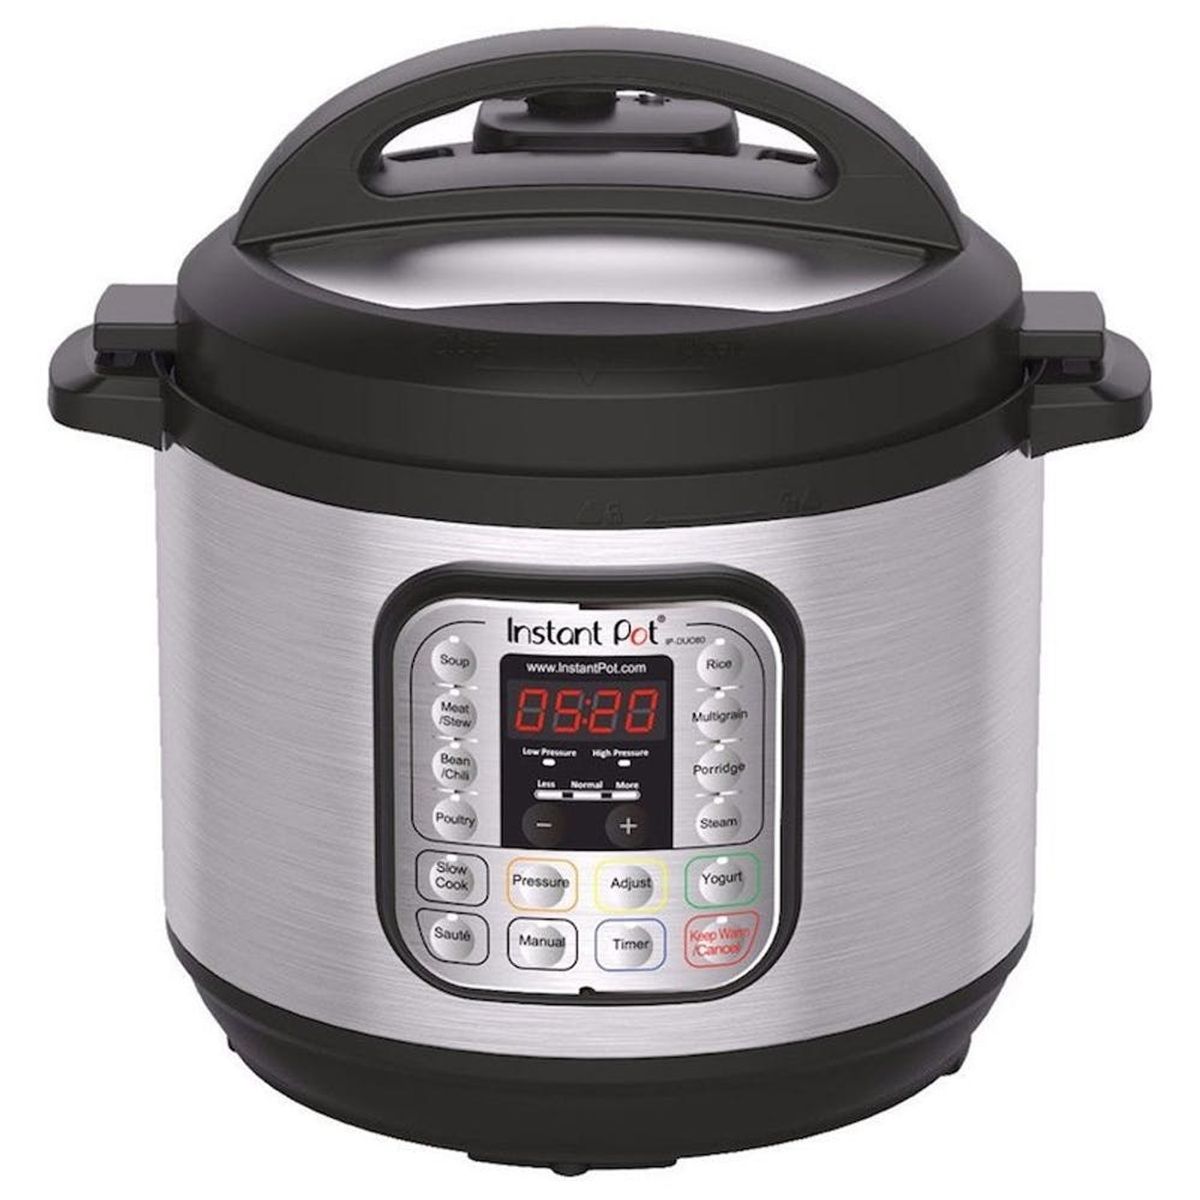 You Finally Bought an Instant Pot! Here Are 10 Tips on How to Use It Properly